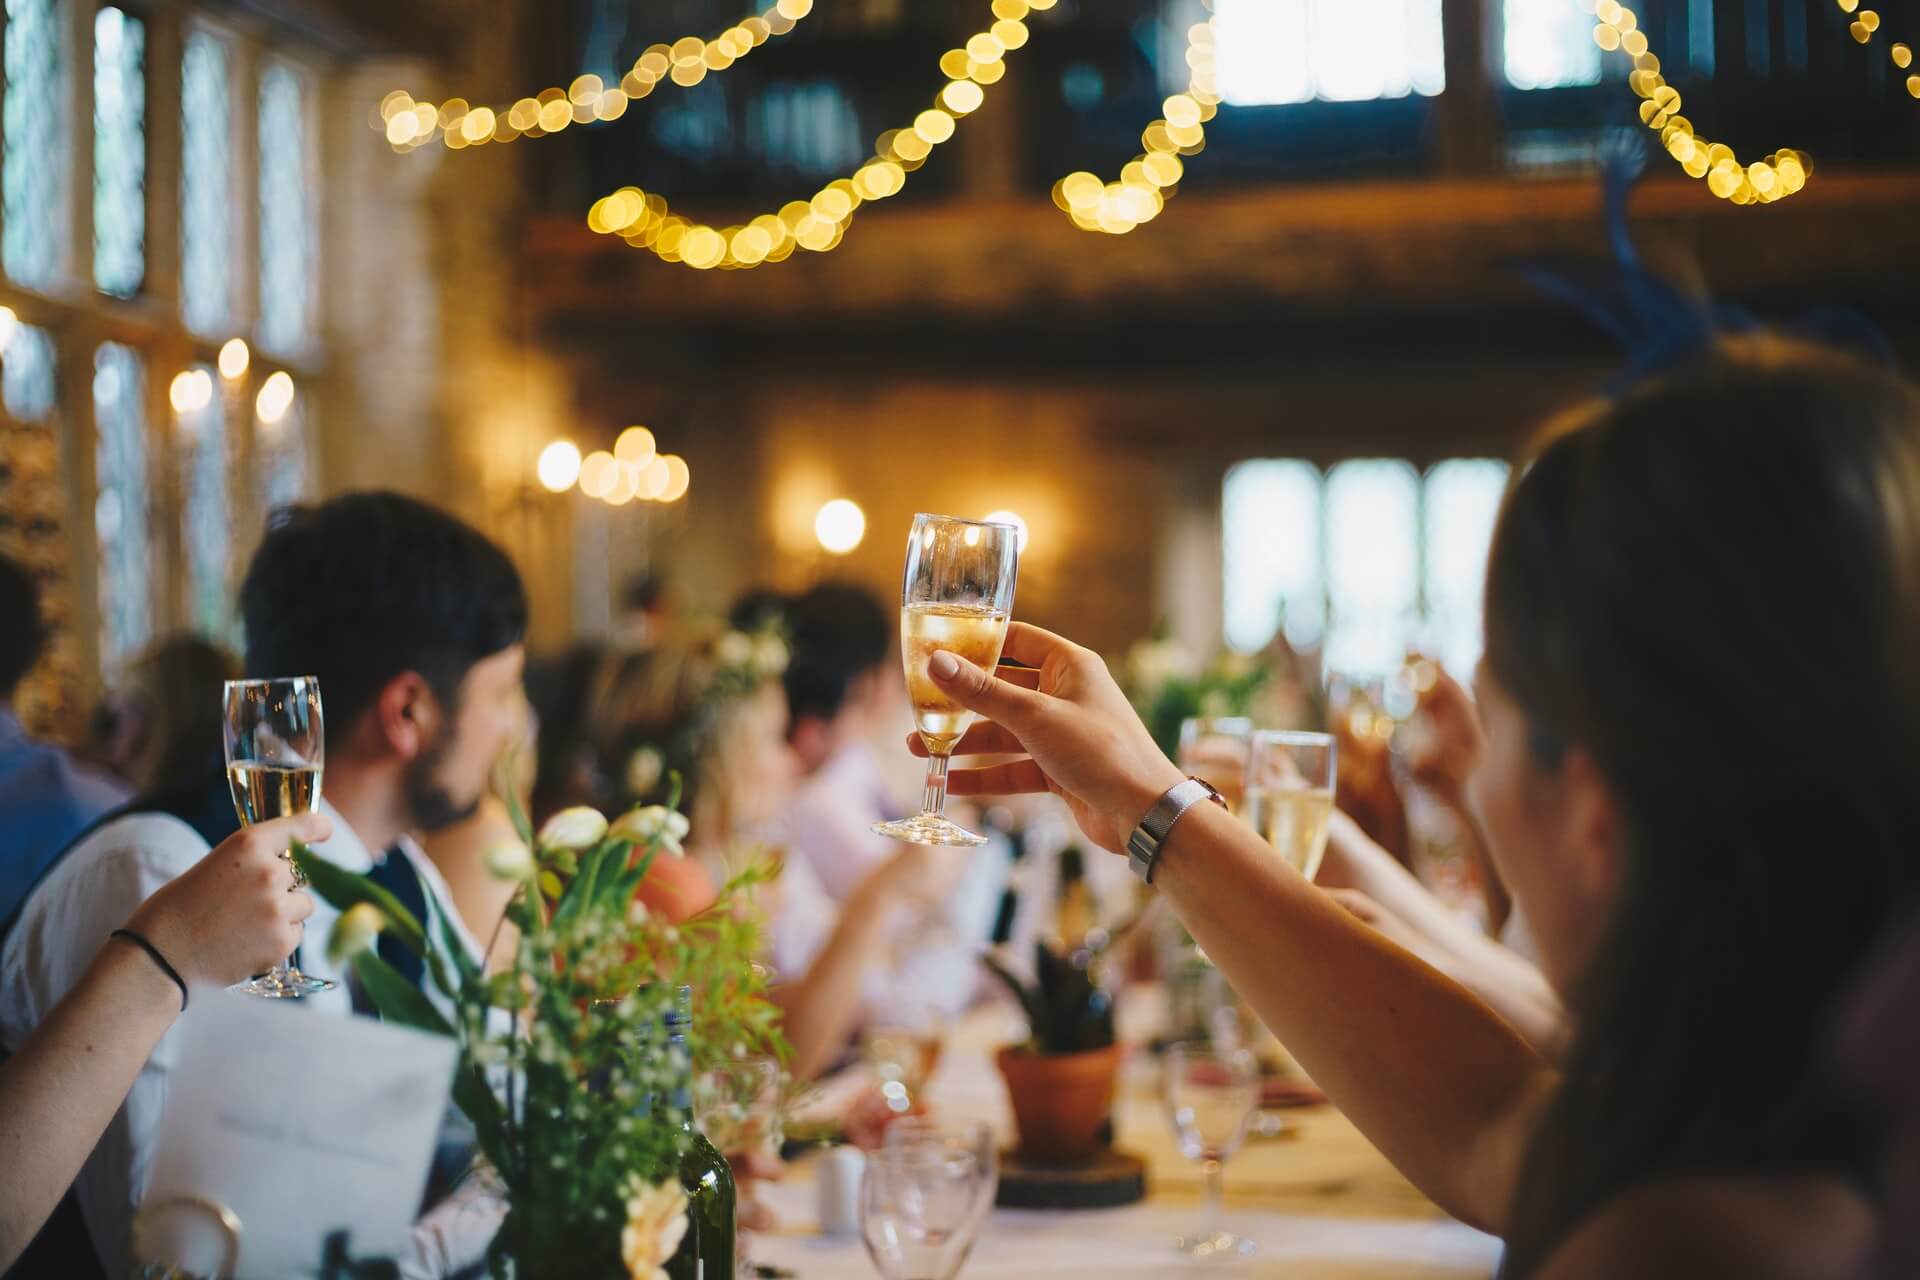 Group of people celebrating a special event and raising their glasses to toast